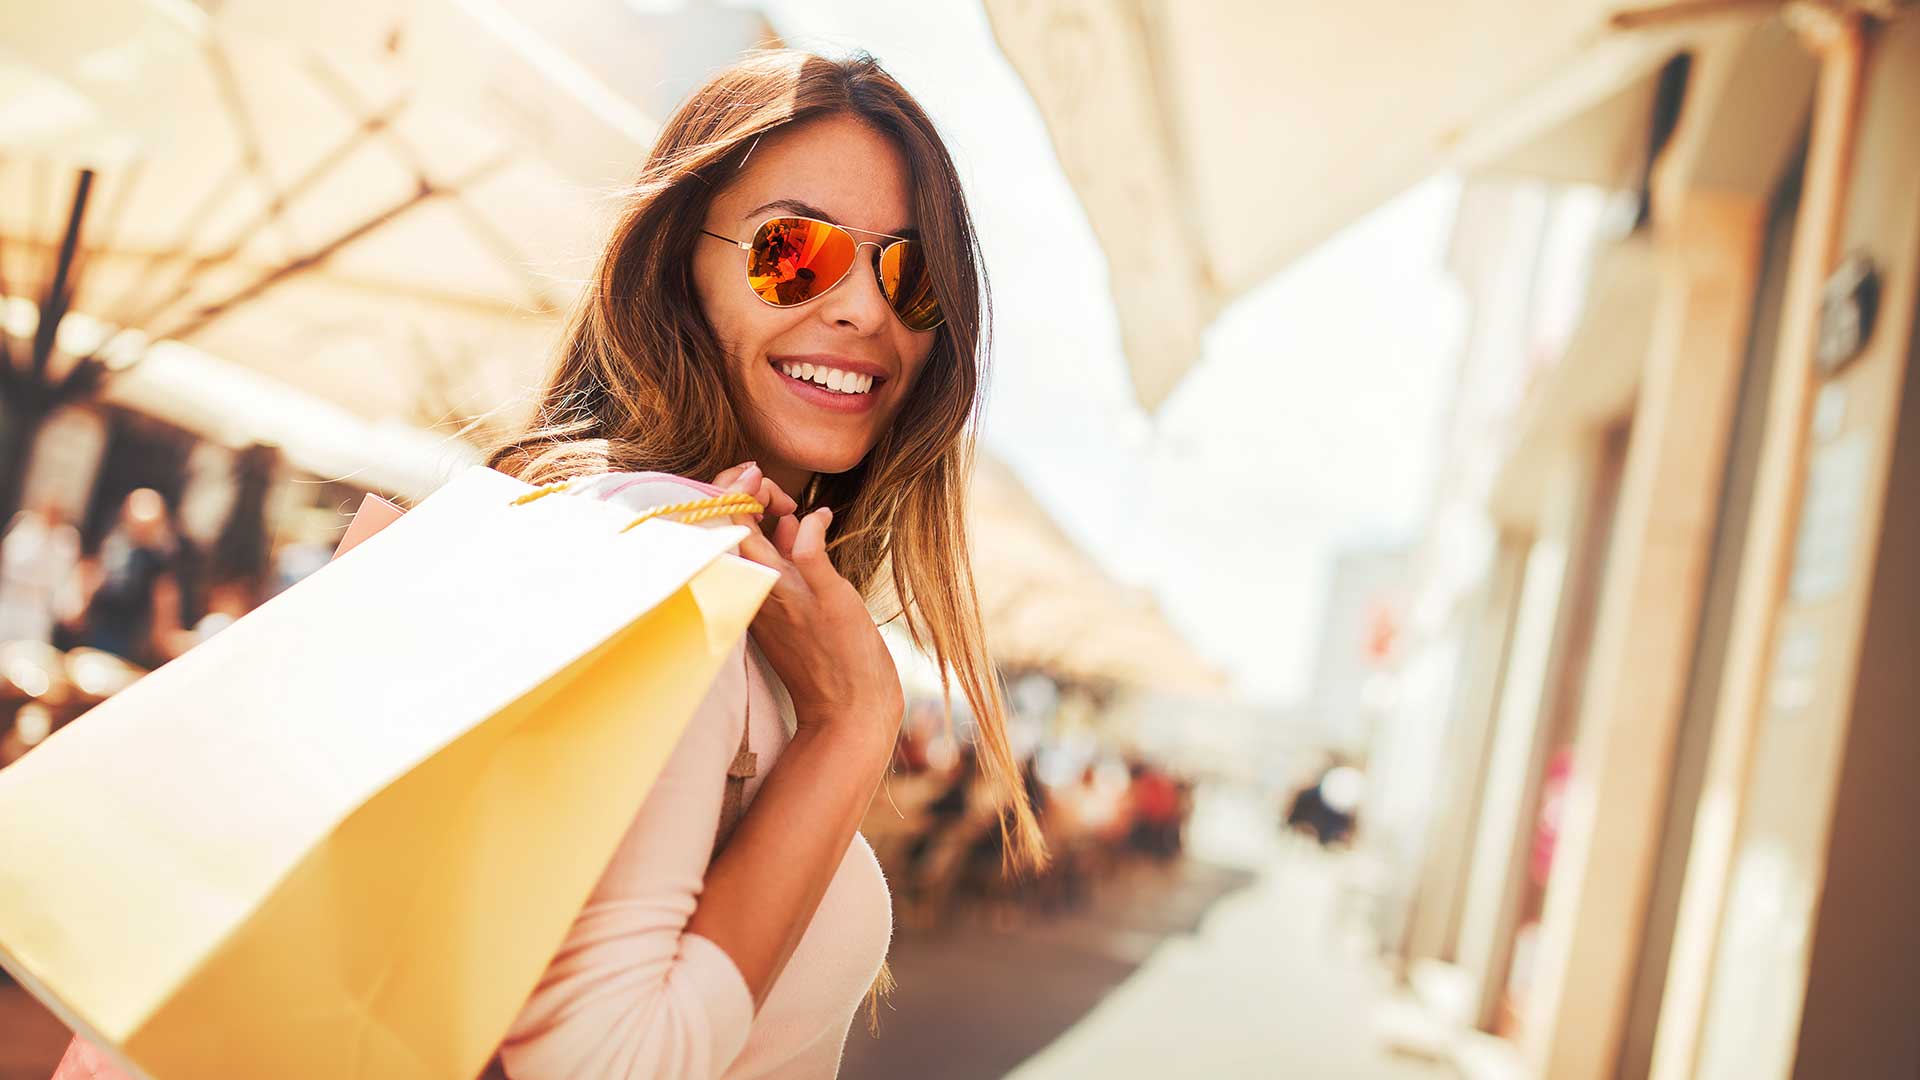 A cheerful woman in sunglasses holding shopping bags on a sunny street, reflecting a lively urban shopping atmosphere.